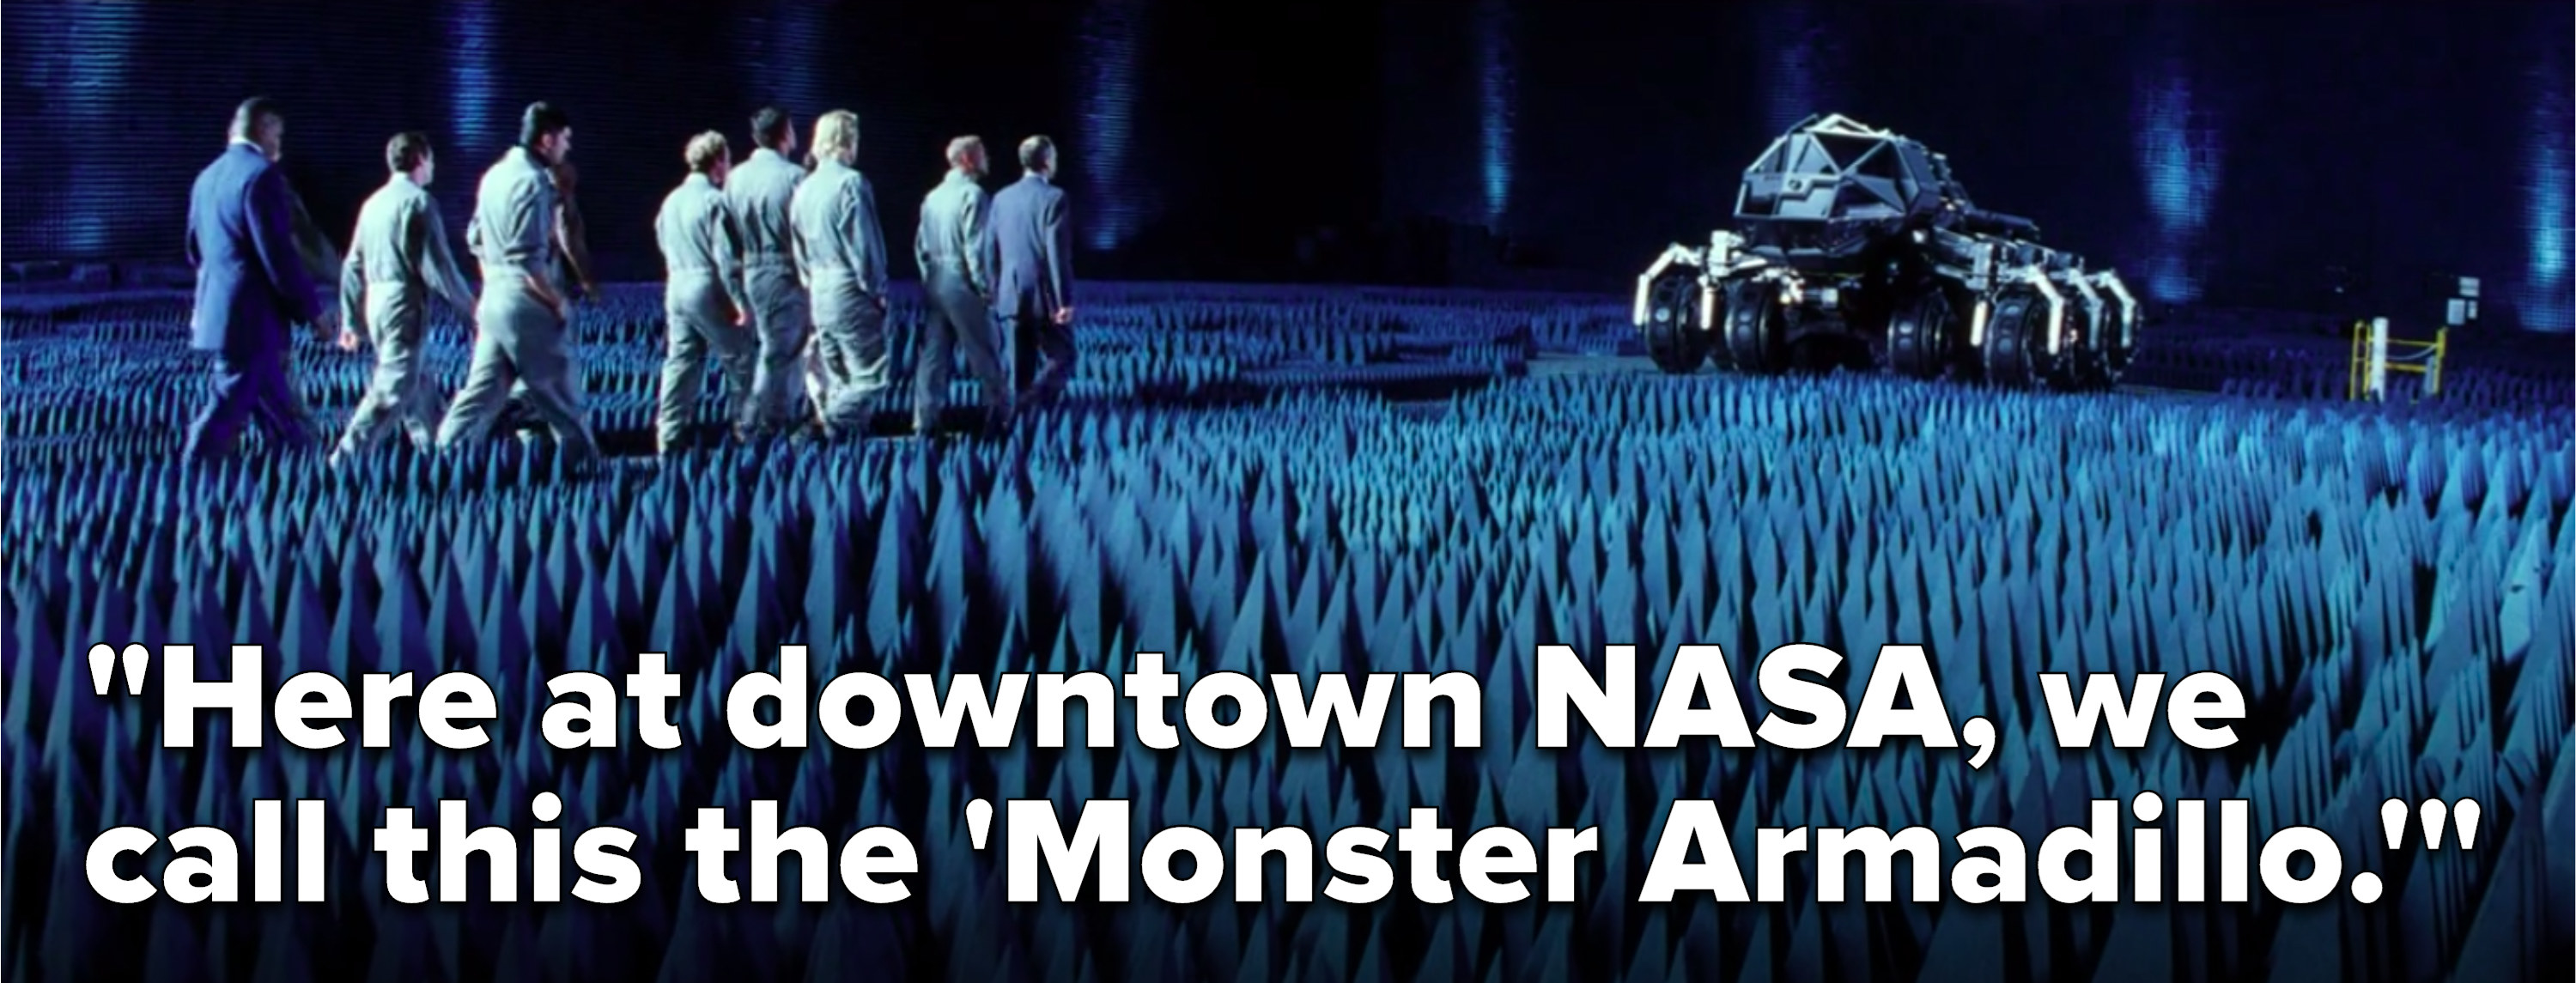 Truman says, &quot;Here at downtown NASA, we call this the &#x27;Monster Armadillo&#x27;&quot;